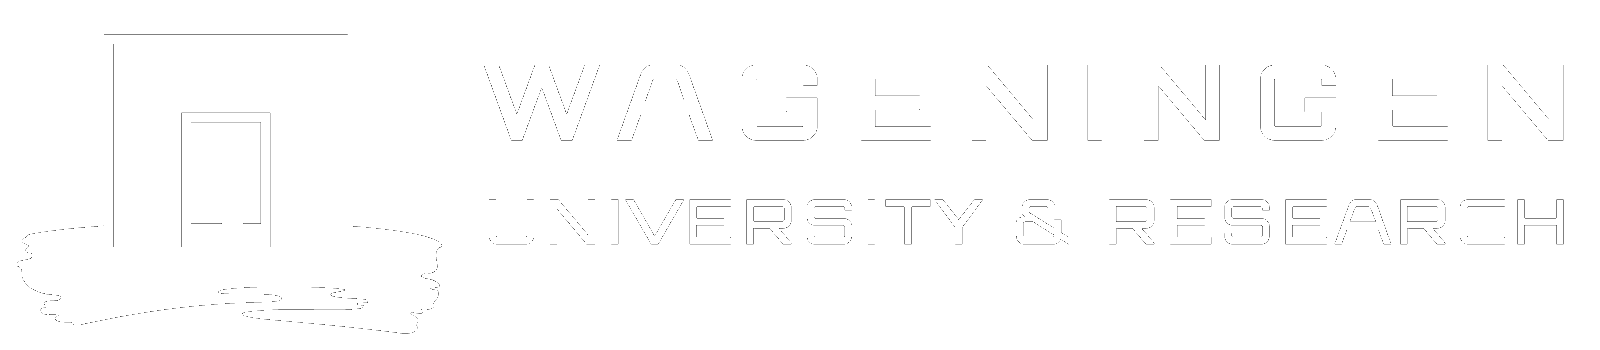 Wageningen University & Research - For quality of life